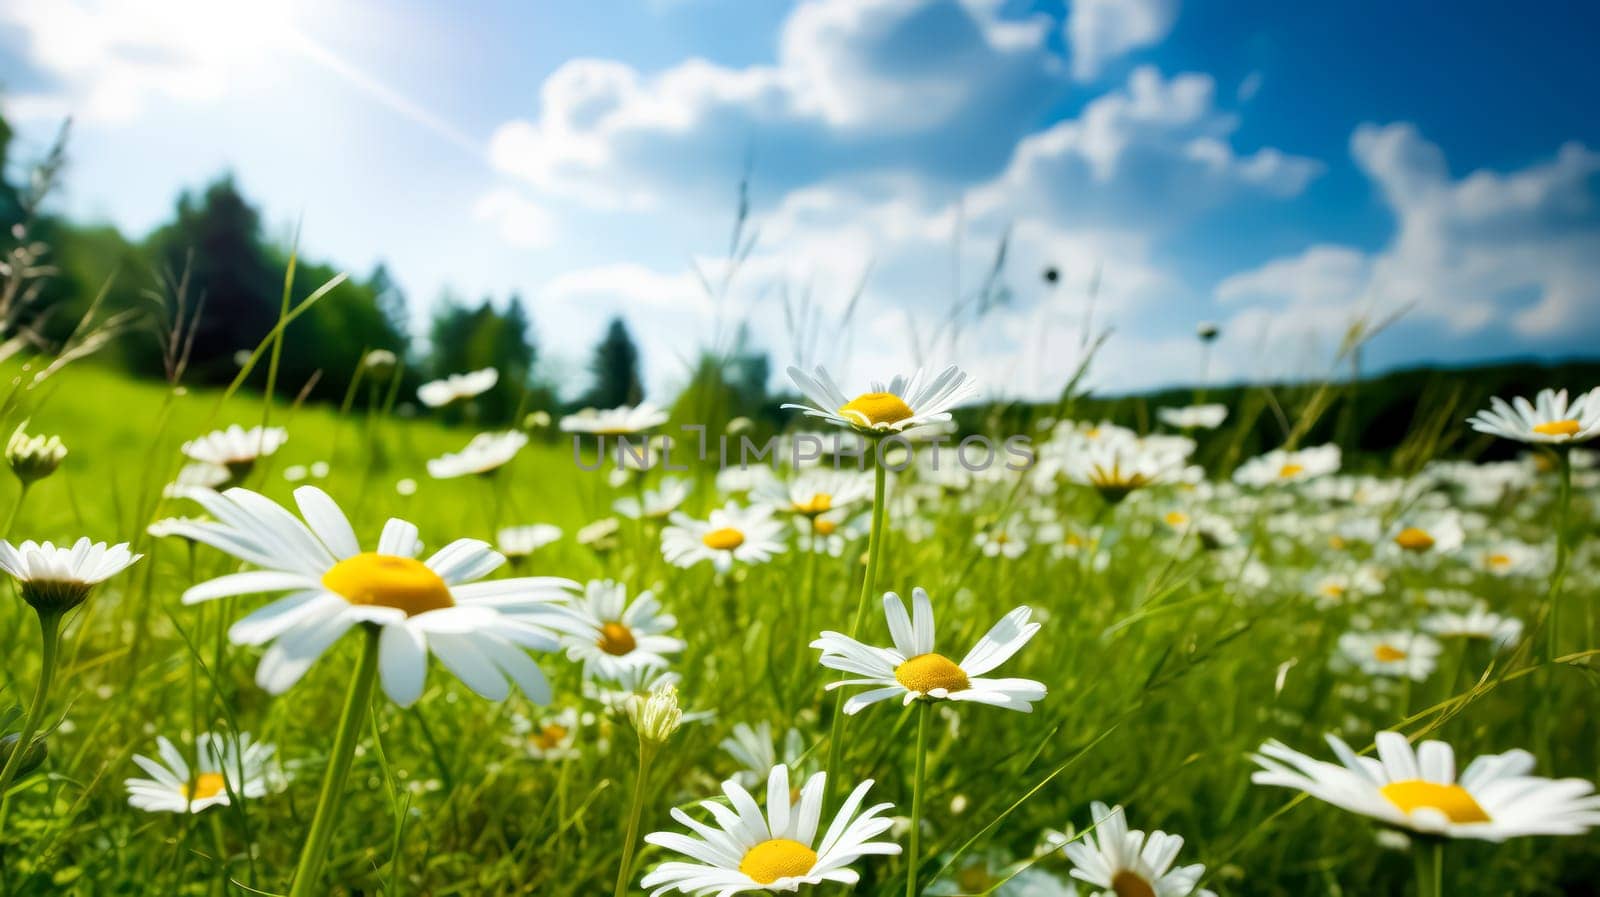 Daisies bloom in a sun drenched spring meadow. by Alla_Morozova93